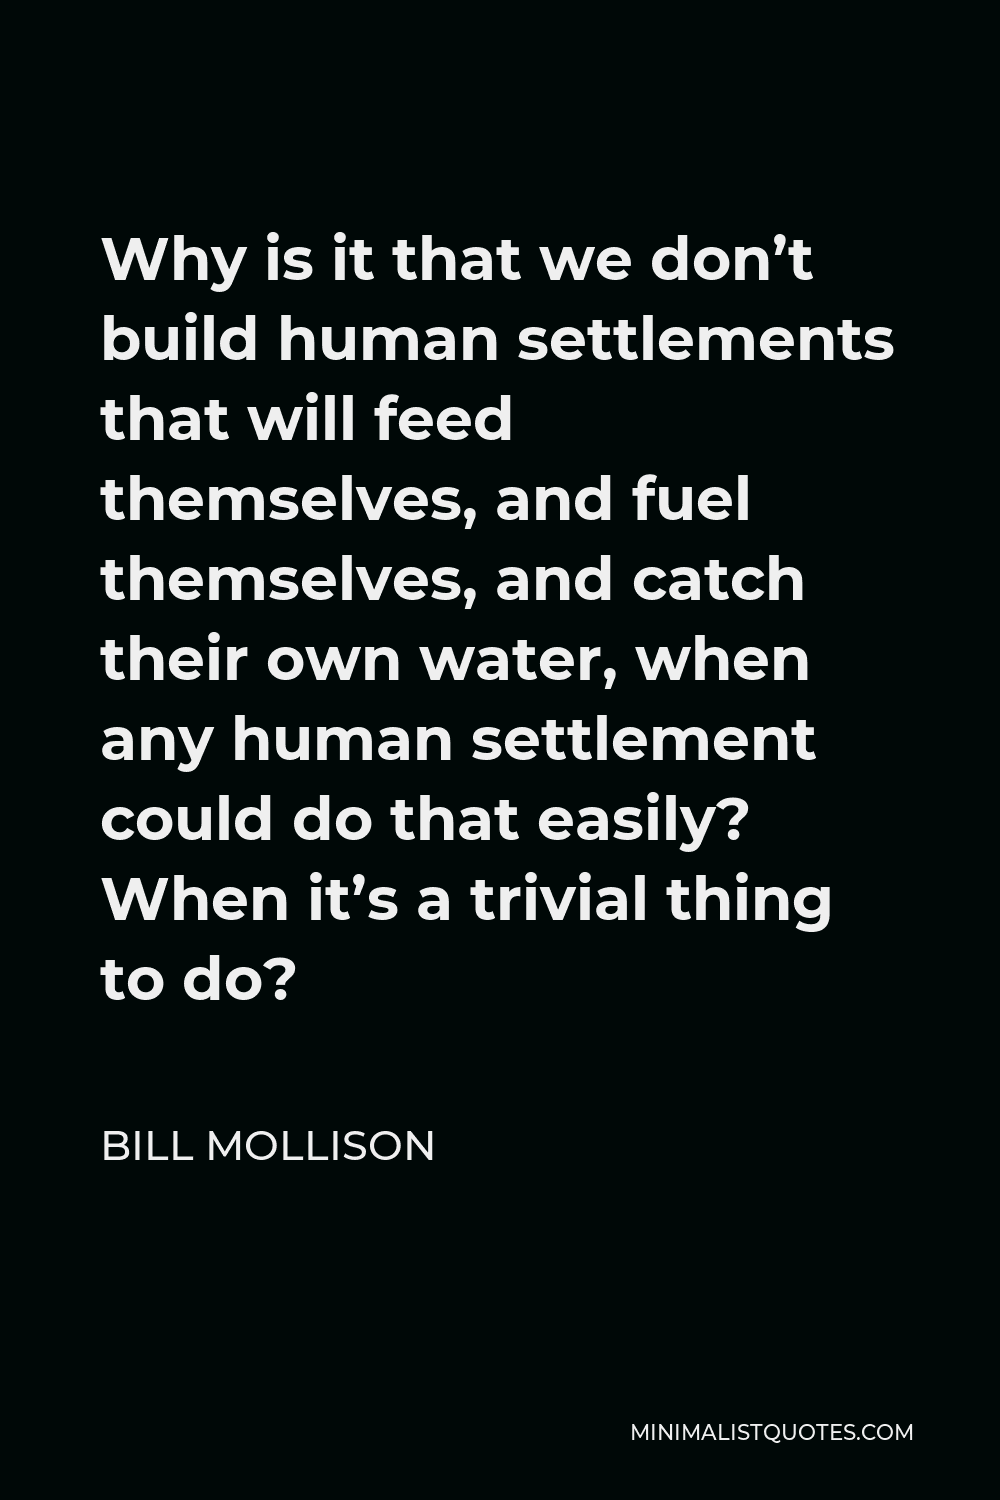 Bill Mollison Quote - Why is it that we don’t build human settlements that will feed themselves, and fuel themselves, and catch their own water, when any human settlement could do that easily? When it’s a trivial thing to do?